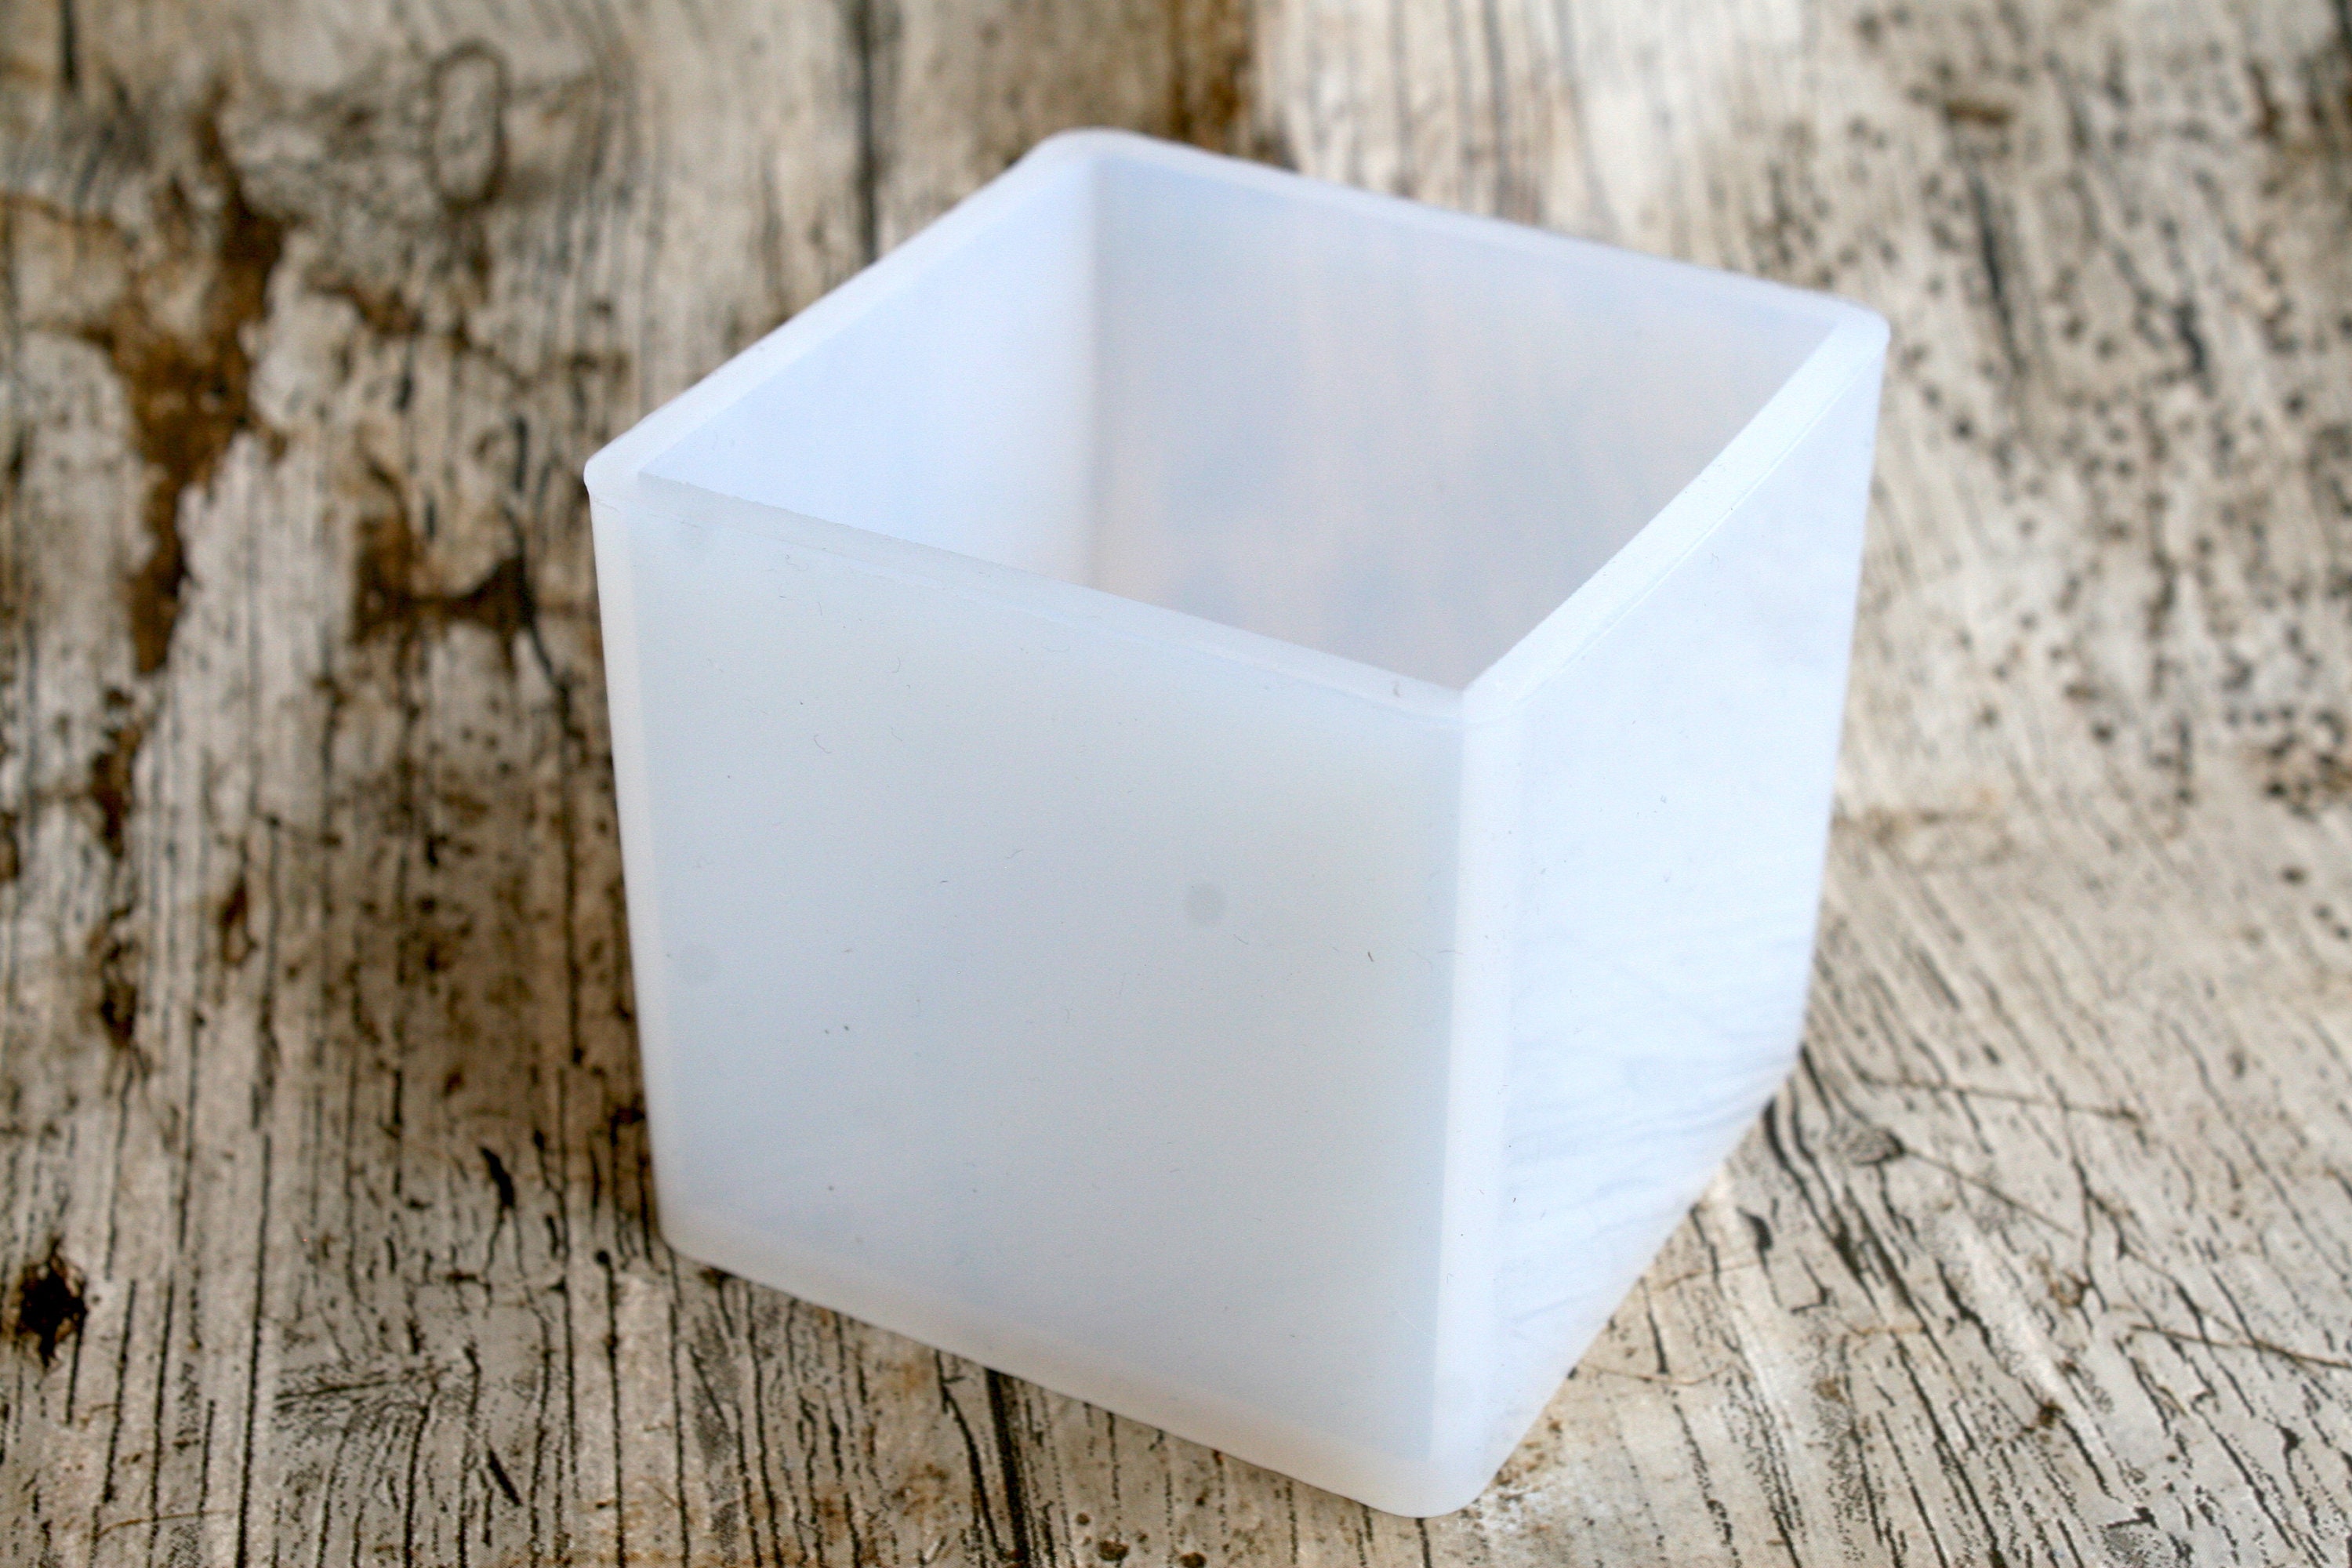 Large Silicone Cube Mould, Silicone Mold, Mold, Resin Art, Craft